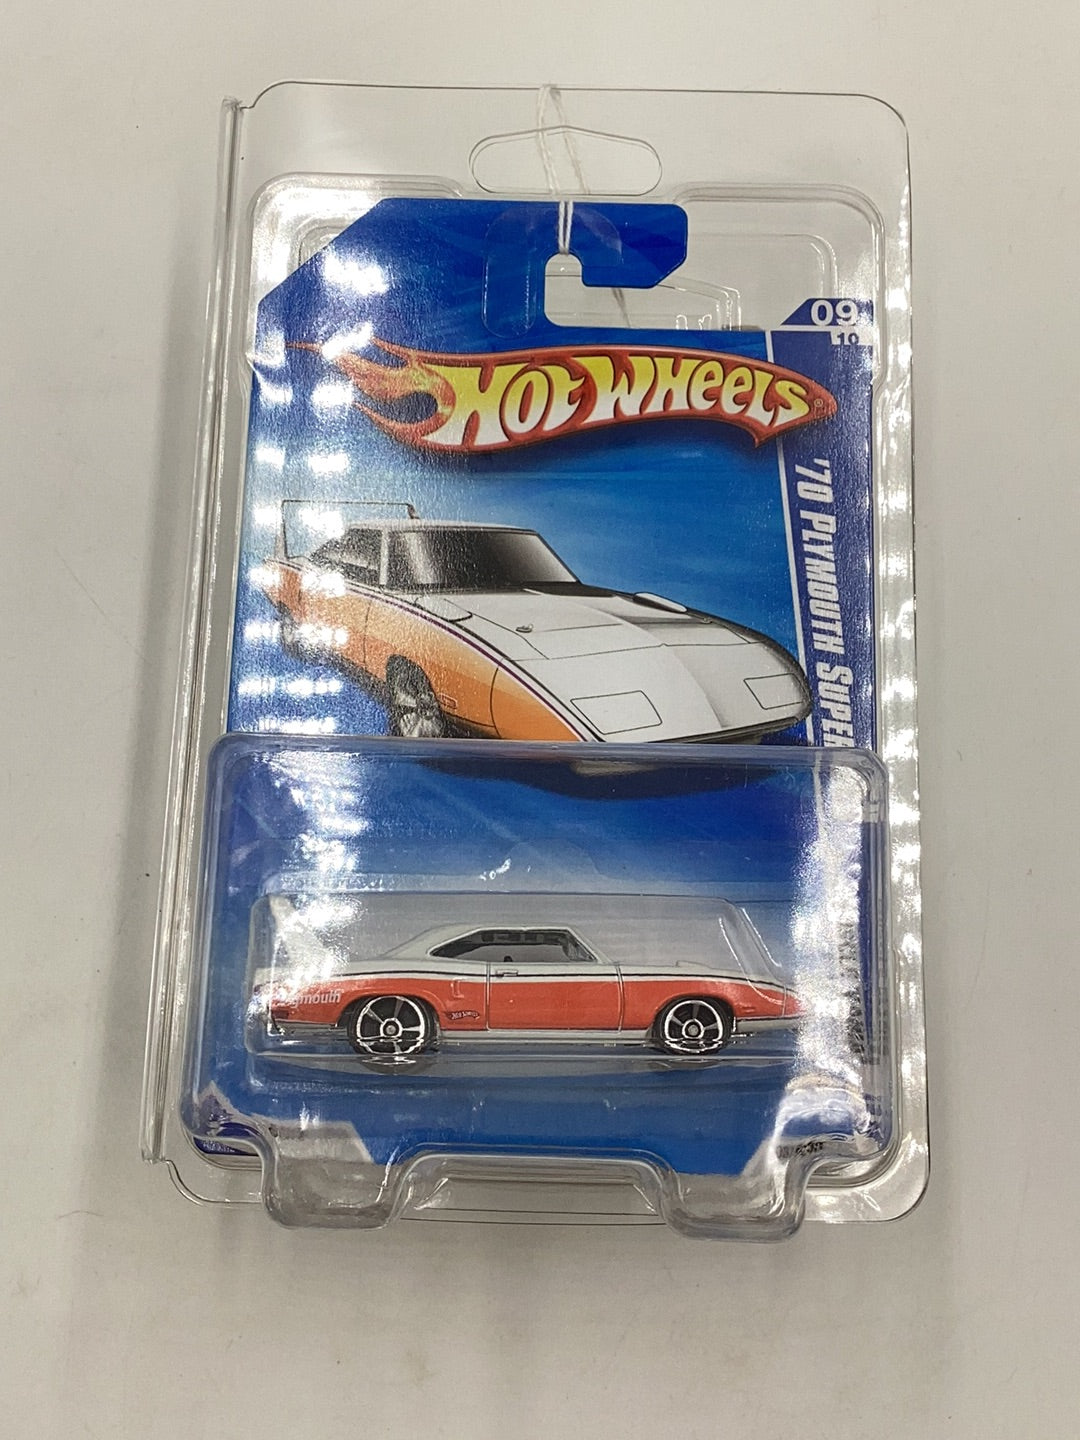 2010 Hot Wheels #87 70 Plymouth Superbird Kmart exclusive W/protector 239C